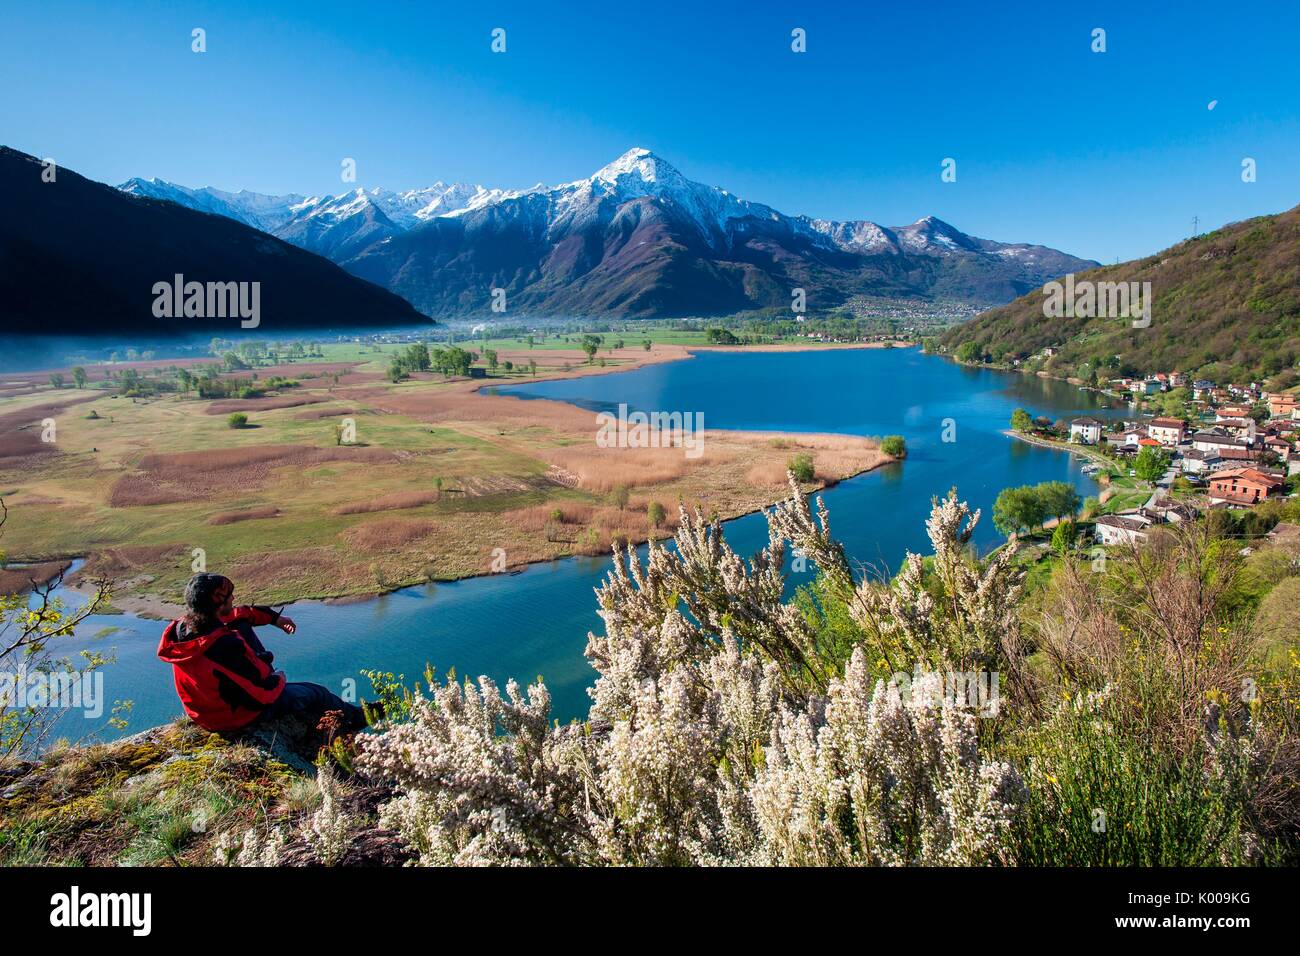 Overlooking the Pian di Spagna reserve, Sorico and Lower Valtellina, Valchiavenna, Italy Stock Photo